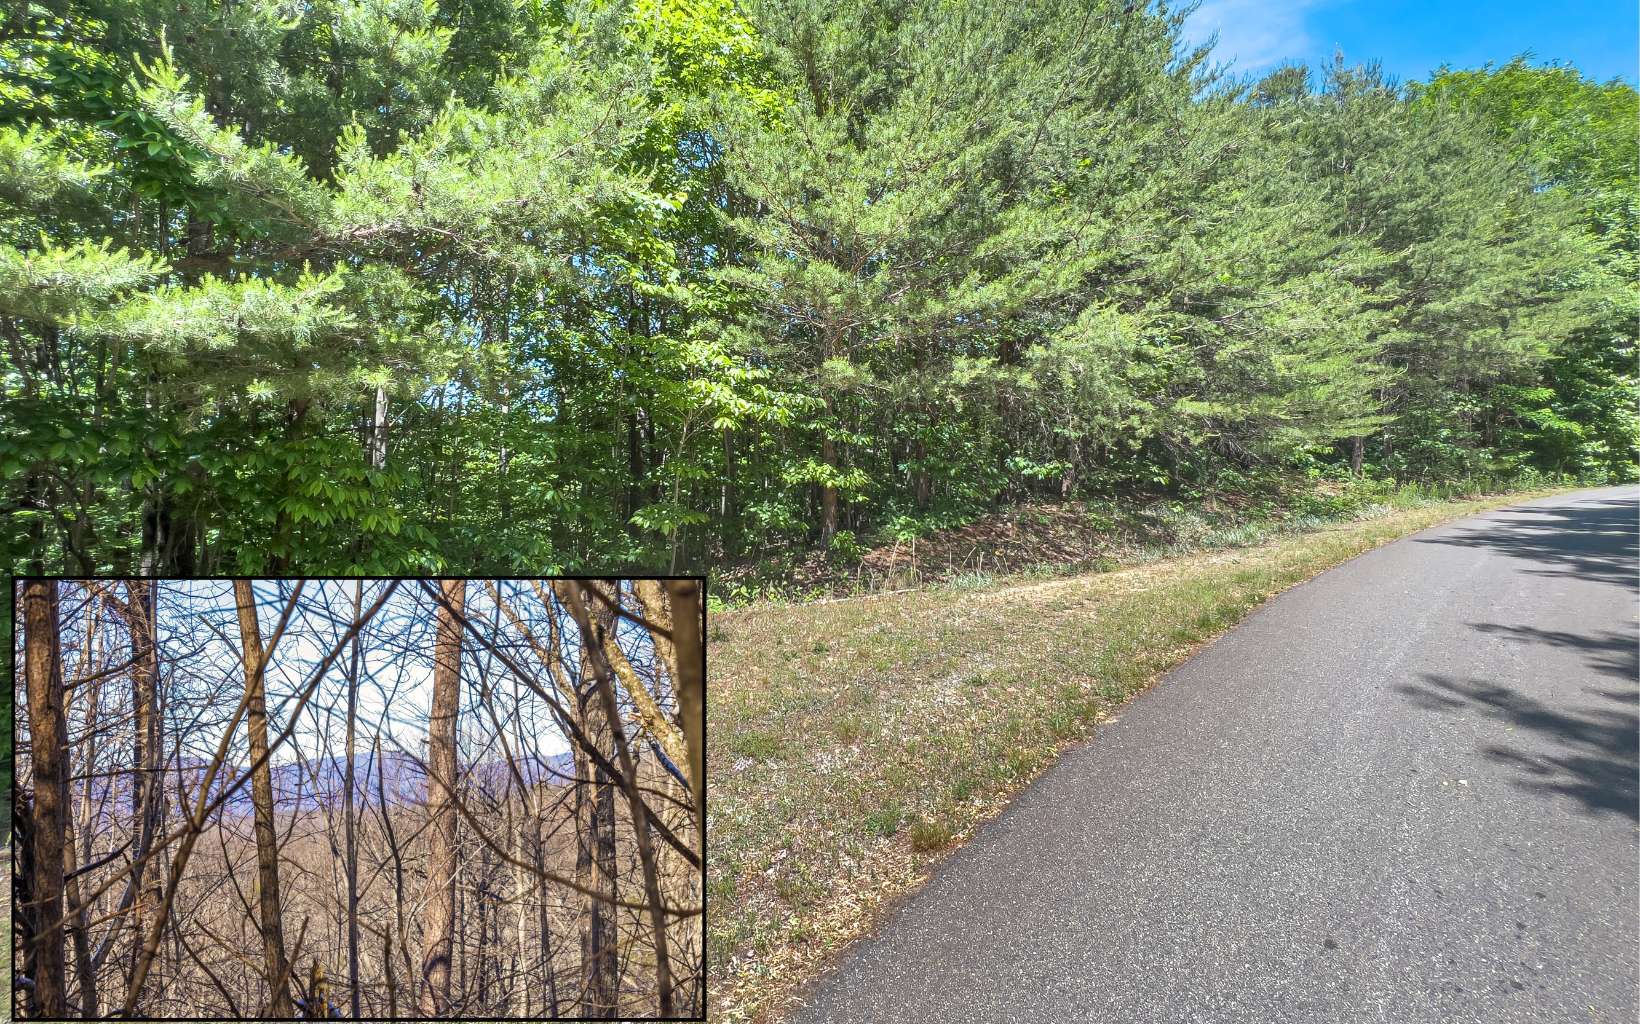 This 4.03AC lot is located in Georgian Highlands, an exclusive gated community known for generous size lots and higher-end homes (note: it does not allow short-term rentals). Located about 25 minutes from Ellijay with all-paved road access and underground utilities, this lot has gentle wooded terrain with many potential build sites. Georgian Highlands is several thousand acres and 80% of the land has been set aside as unspoiled green space teeming with wildlife. The HOA will even assist you as necessary on the best home site and how to preserve the natural environment as much as possible during building and clearing. Don't delay - a lot in Georgian Highlands will not last long.